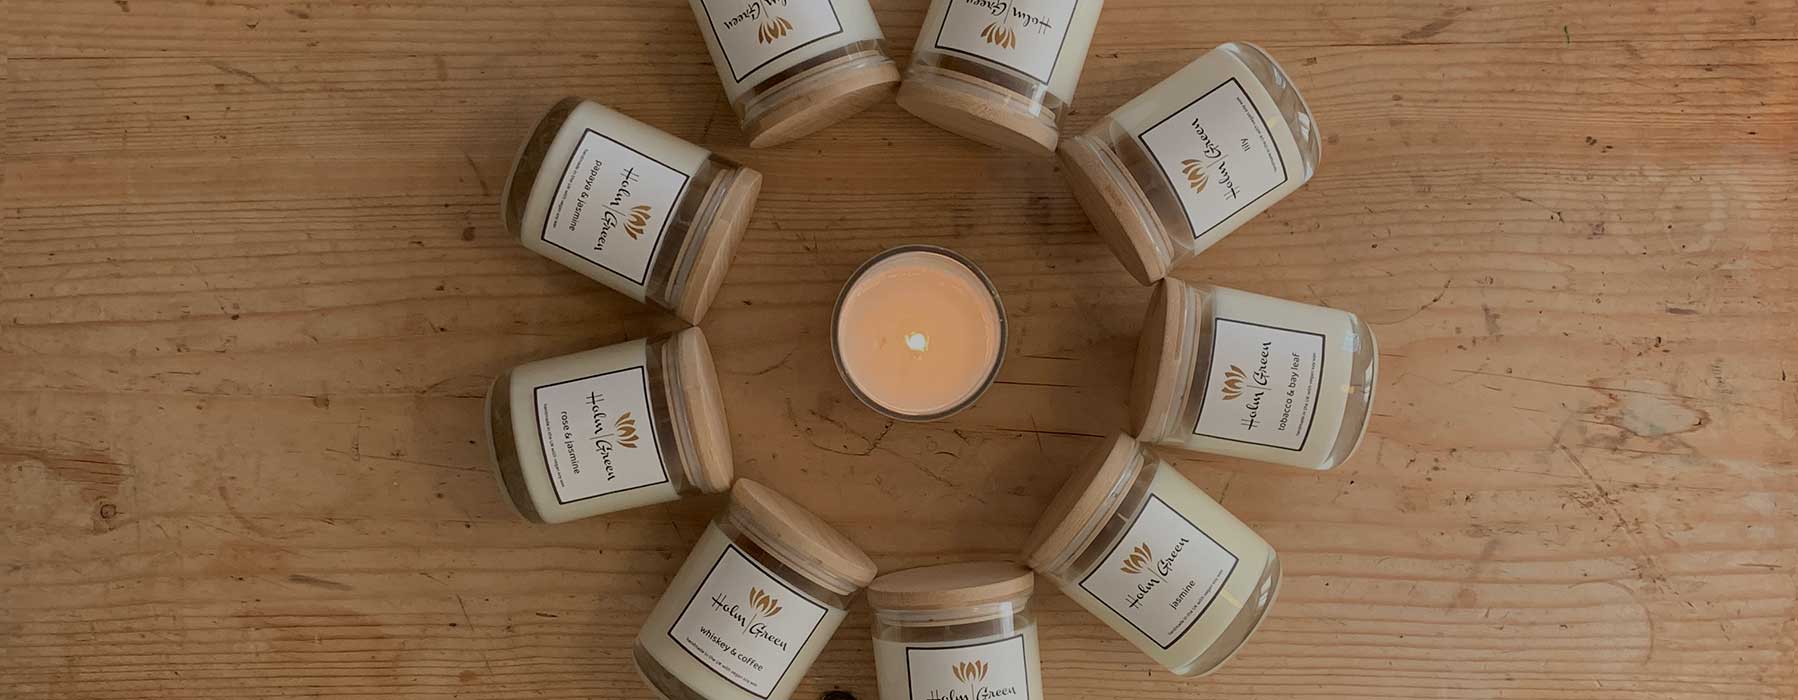 Handmade Scented Candles in Gift Box. Candle Gift for Birthdays, Christmas, Friend Gift, Mothers Day. Candle Yankee. Candle Jo Malone. Candle Shack. Candle Scents.